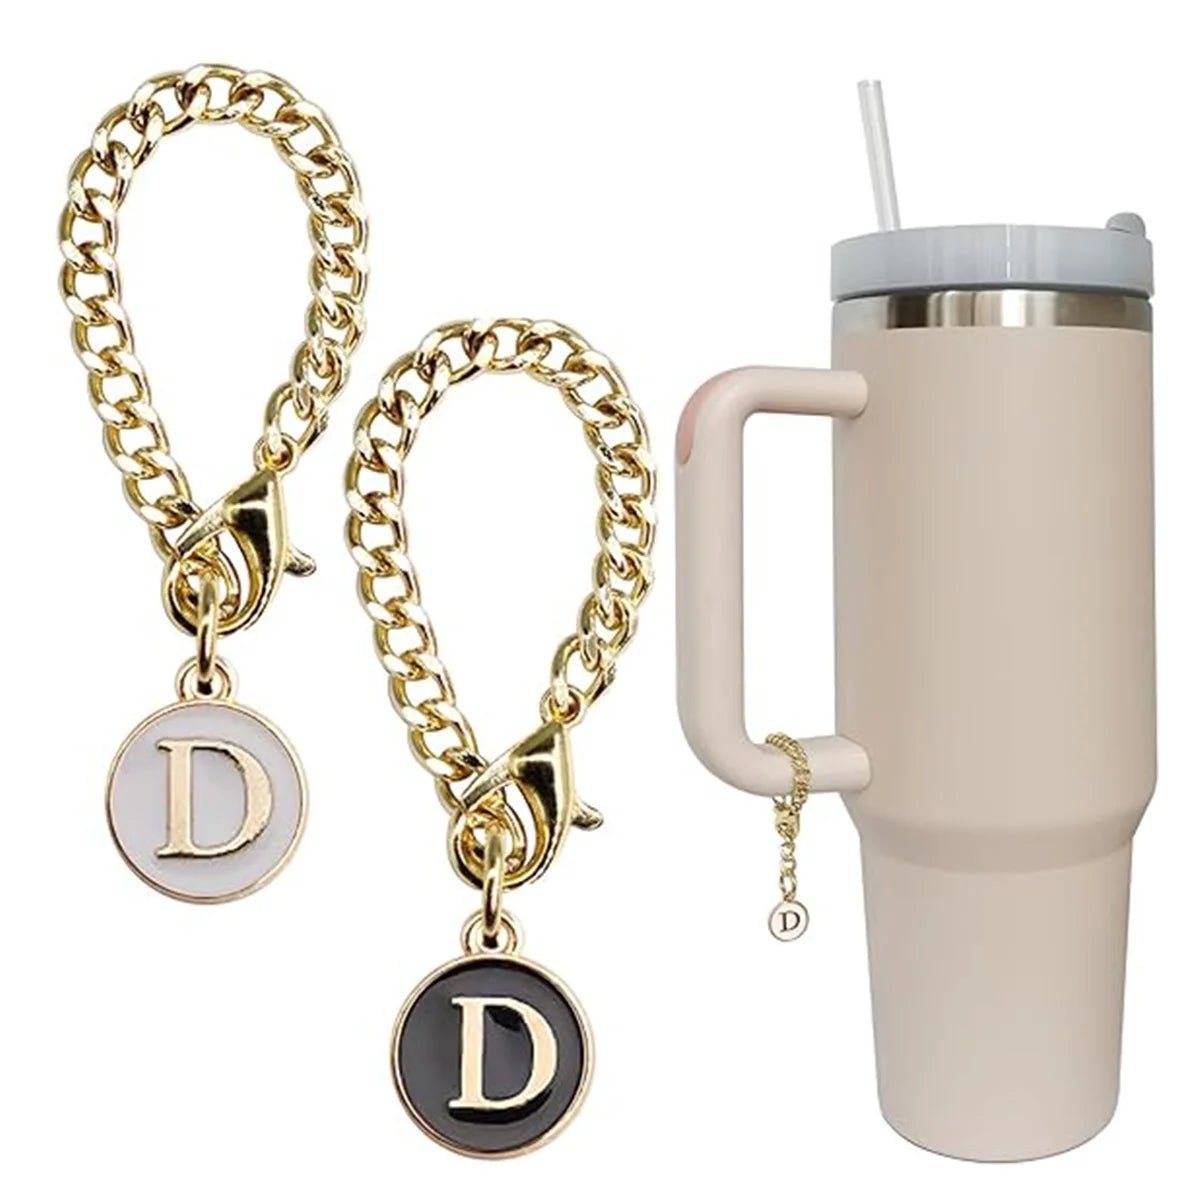 2PCS Initial Name ID Letter Charm Accessories for Stanley Cup - Personalized Handle Charm for Stanley Tumbler D